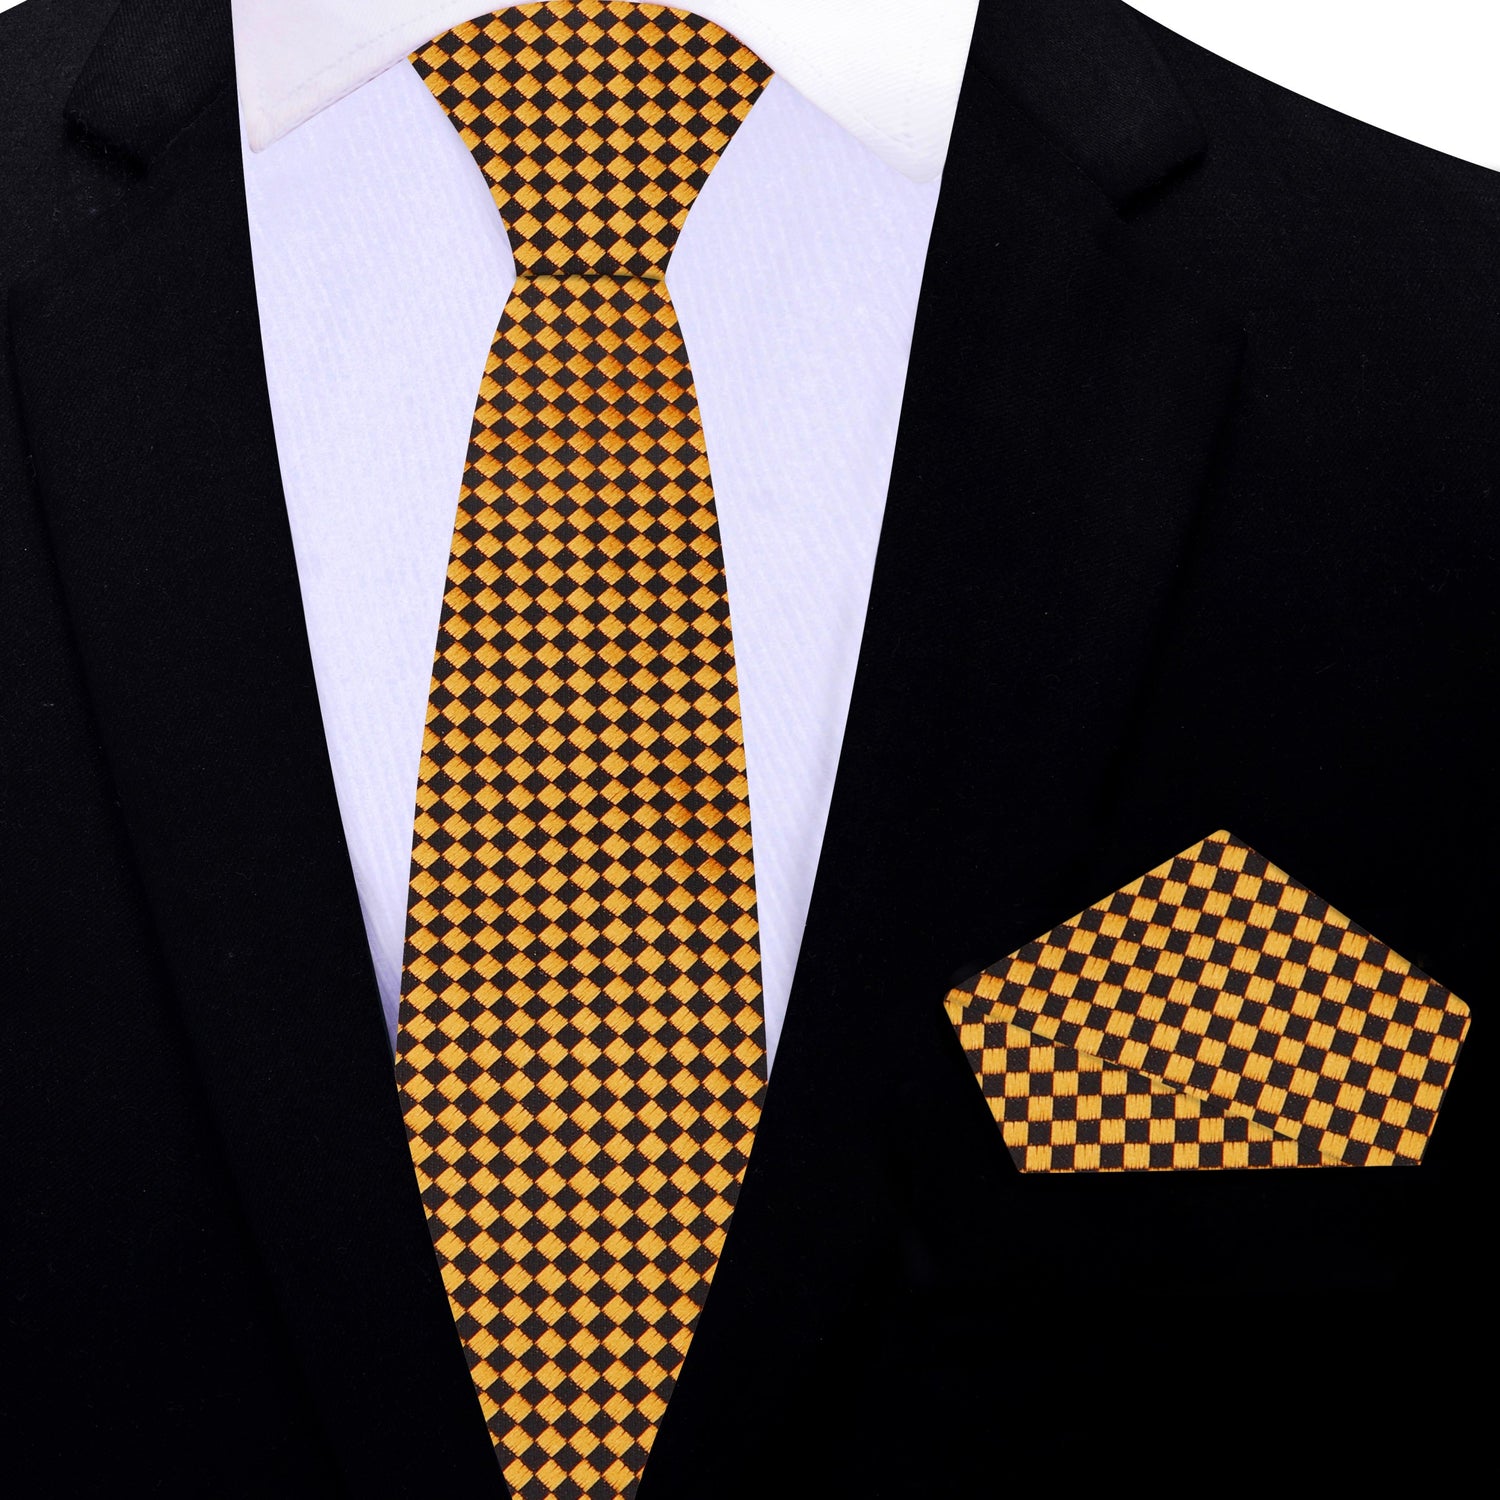 Thin Tie: Gold & Black Small Diamonds Necktie and Matching Pocket Square